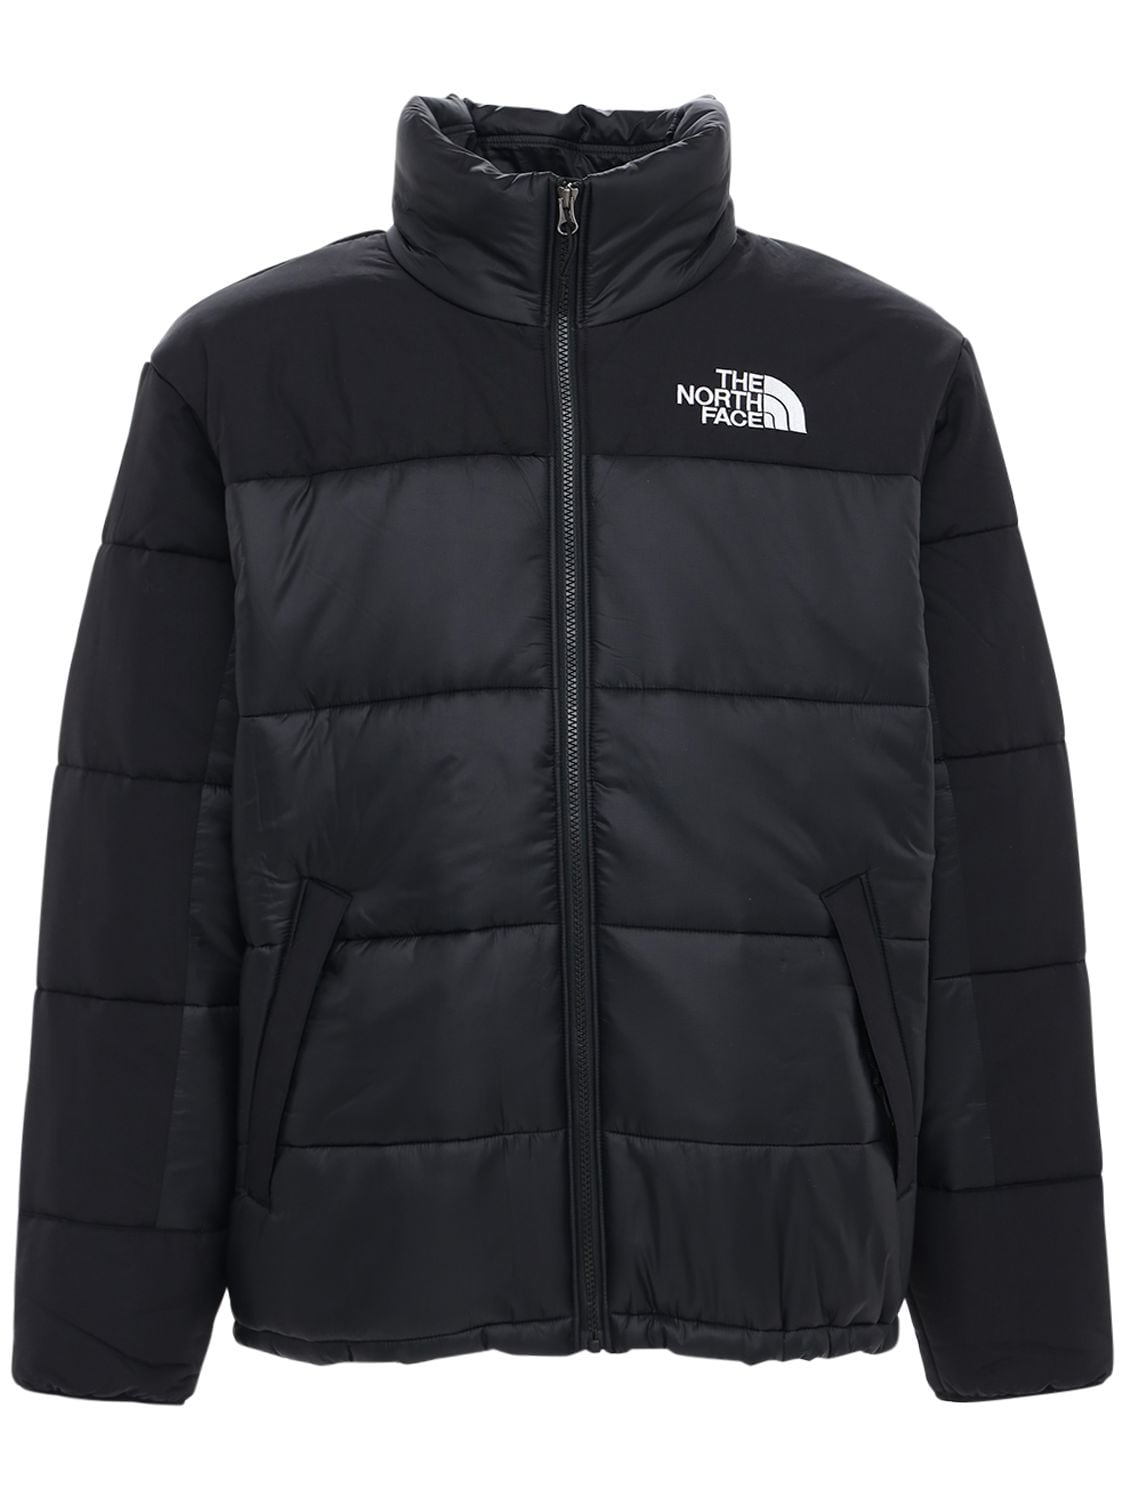 THE NORTH FACE Himalayan Insulated Jacket